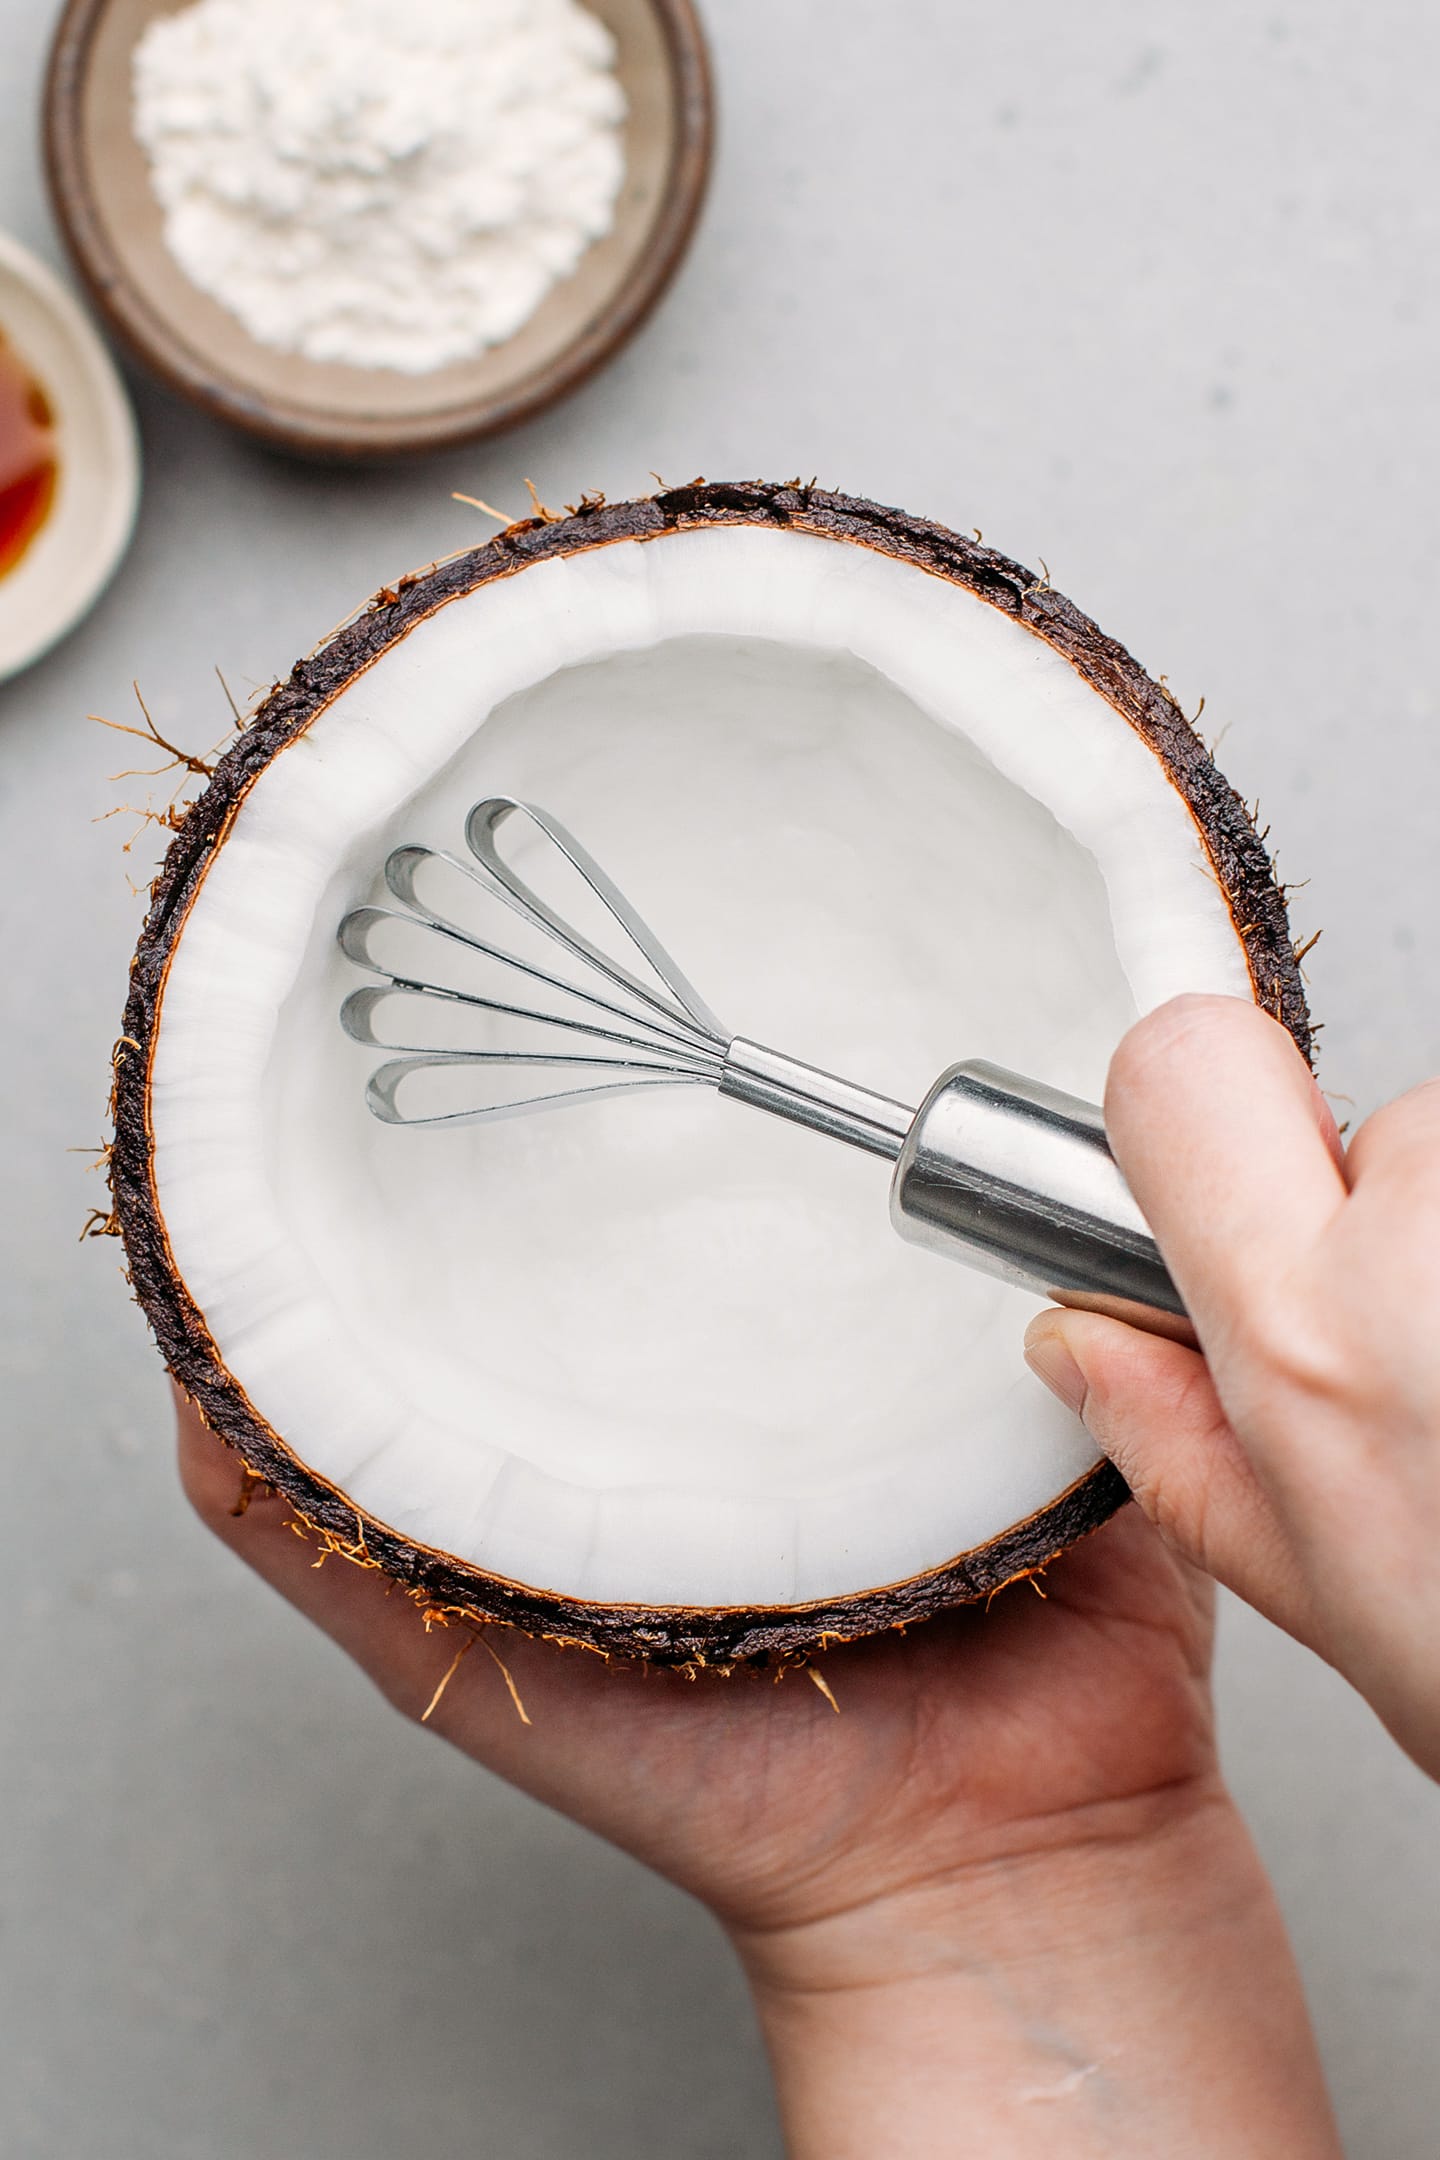 Grating a coconut using a coconut grater.